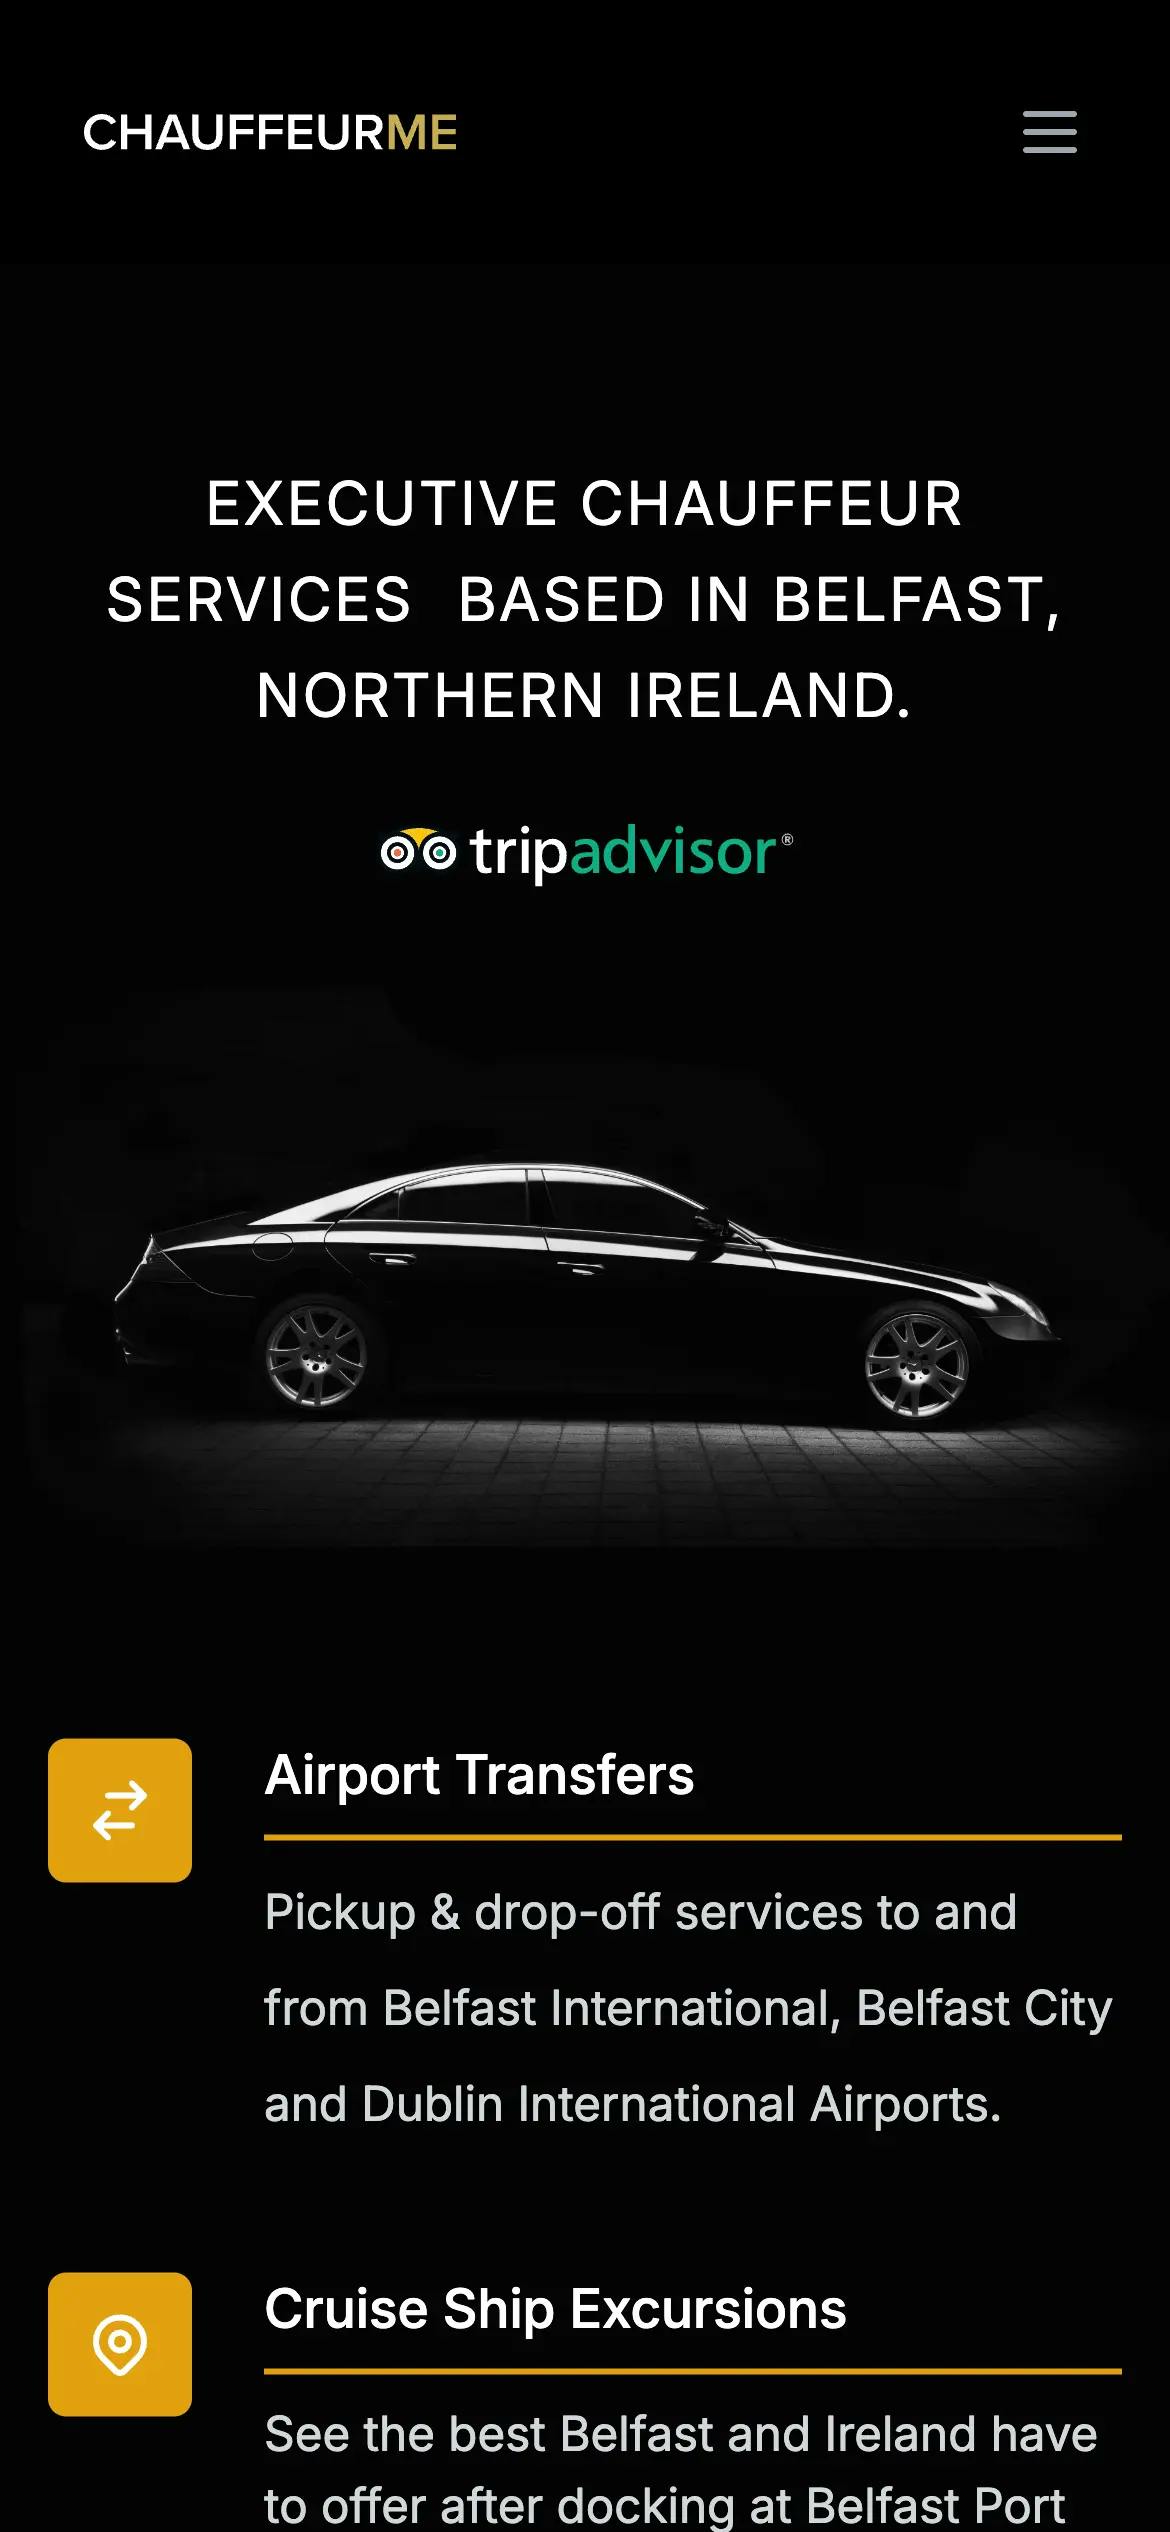 Chauffeur Me home page on mobile